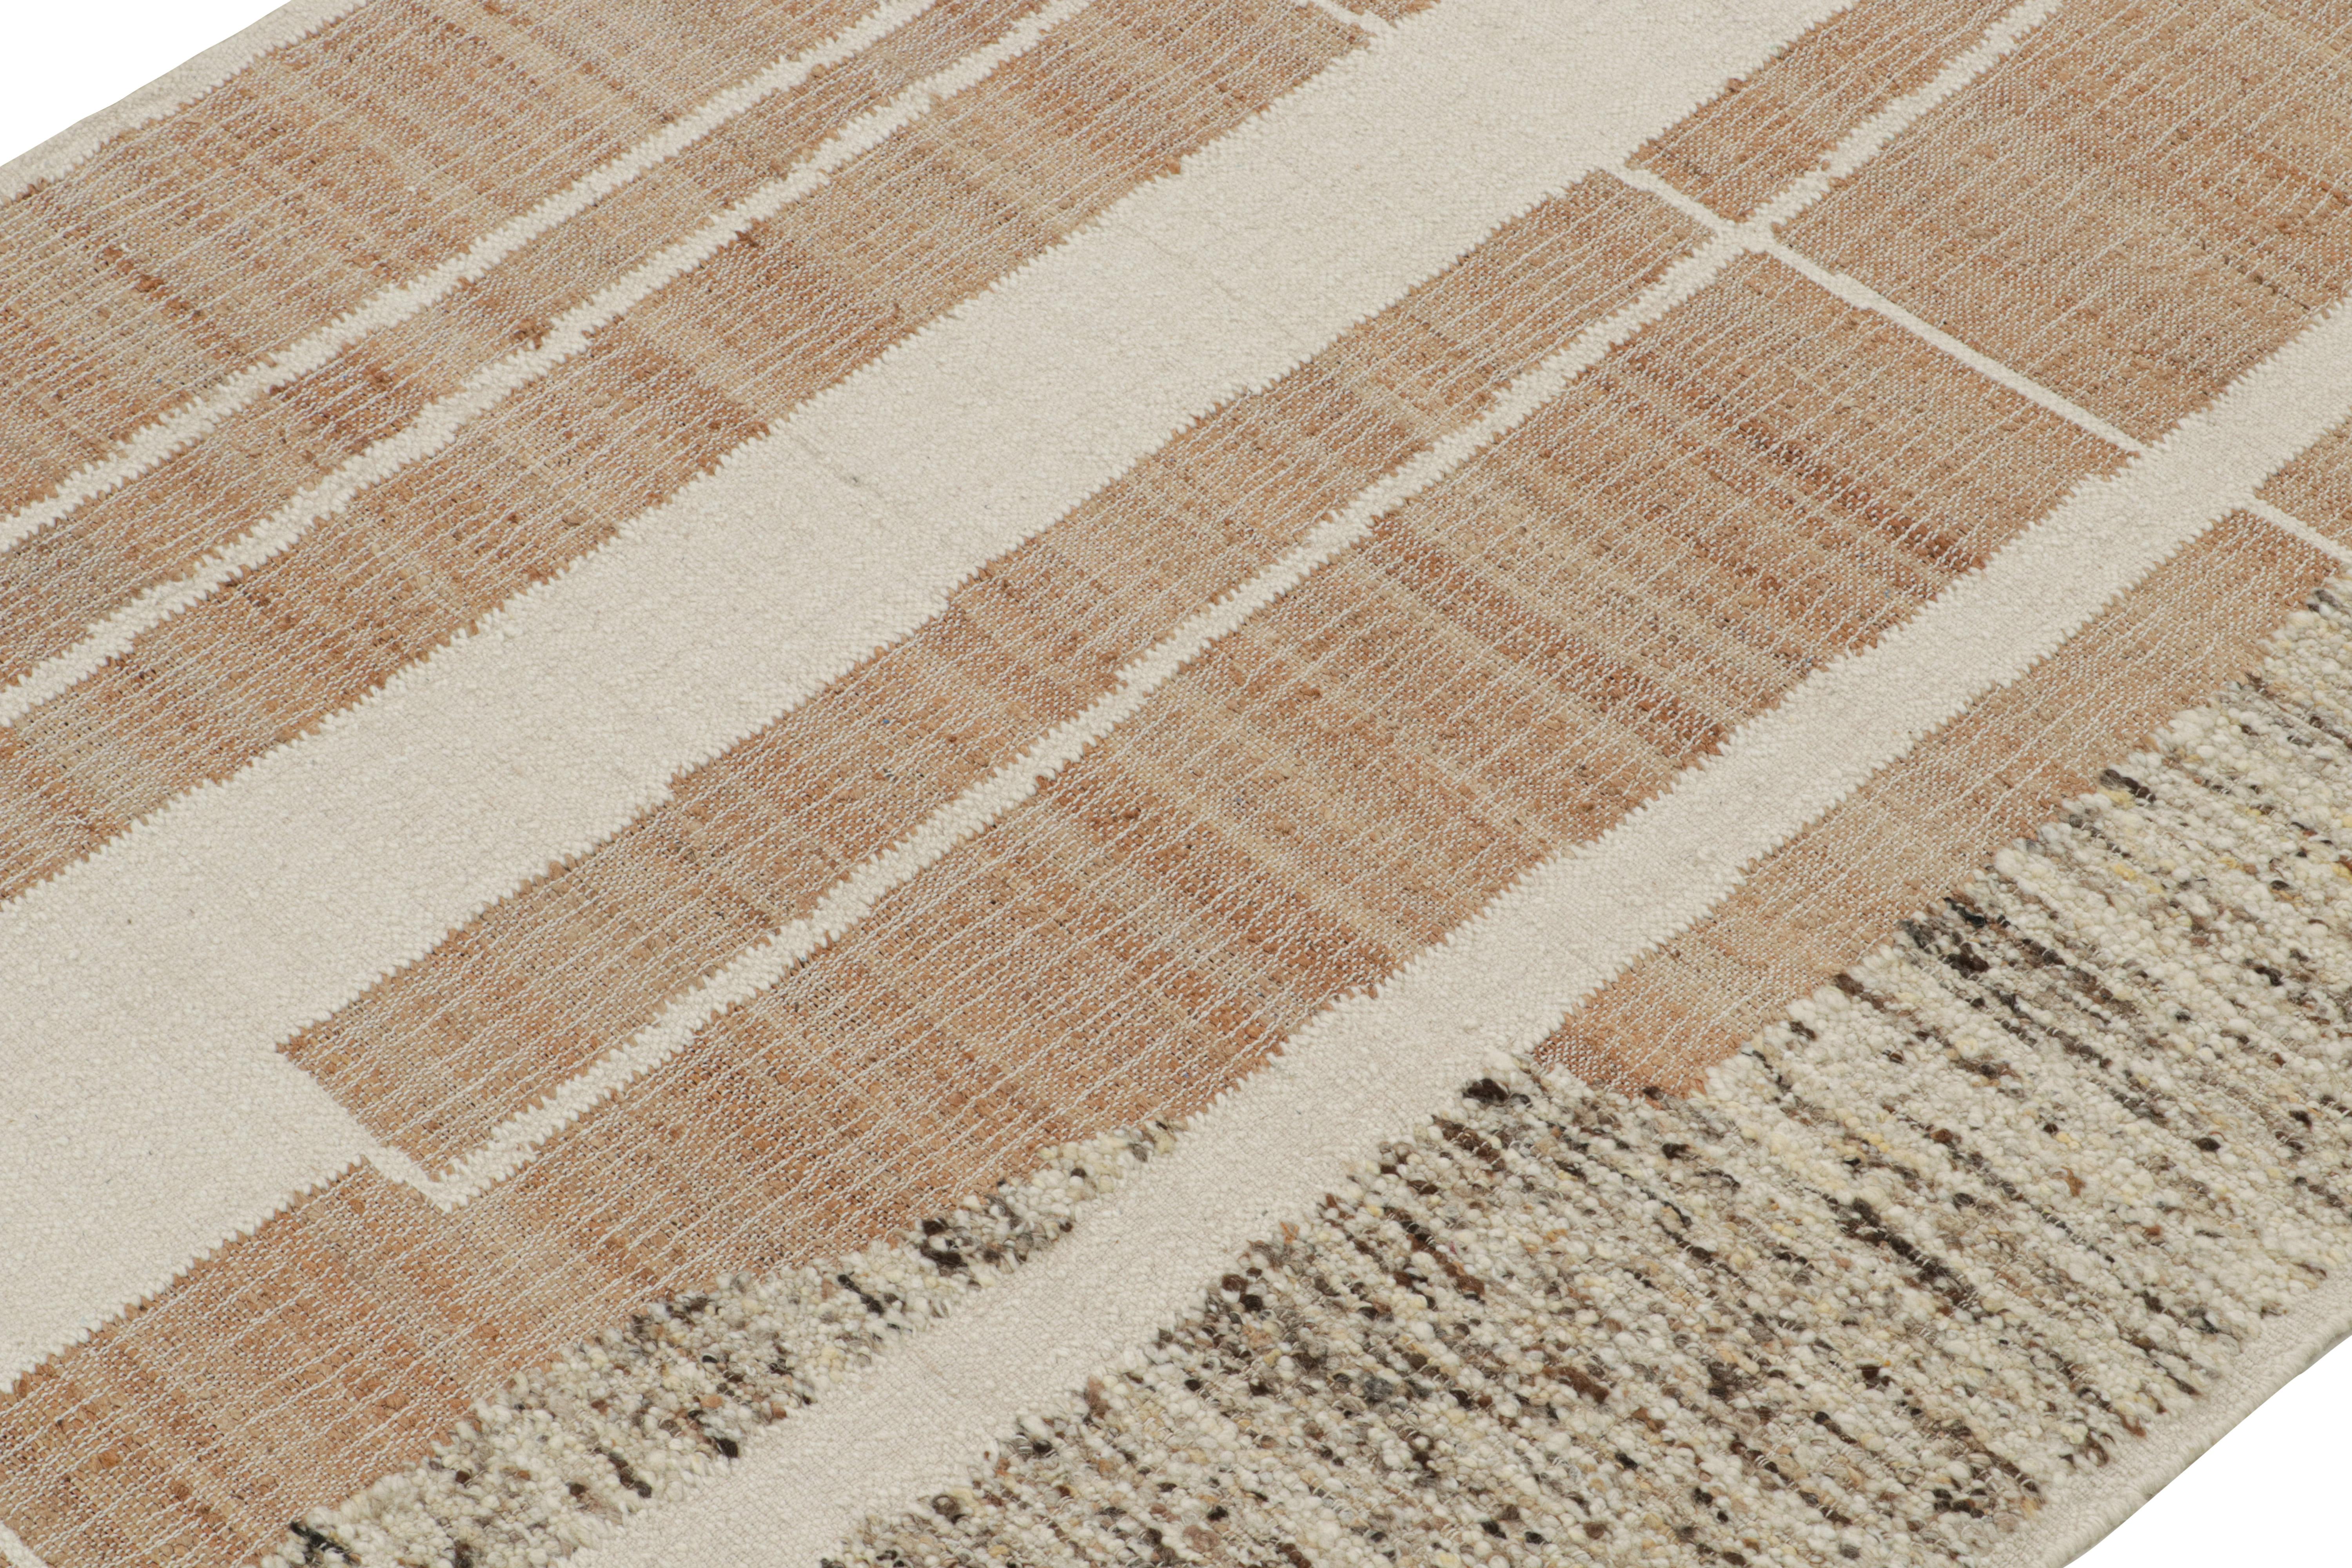 Indian Rug & Kilim’s Contemporary kilim rug in Beige-Brown & White Abstract Pattern For Sale